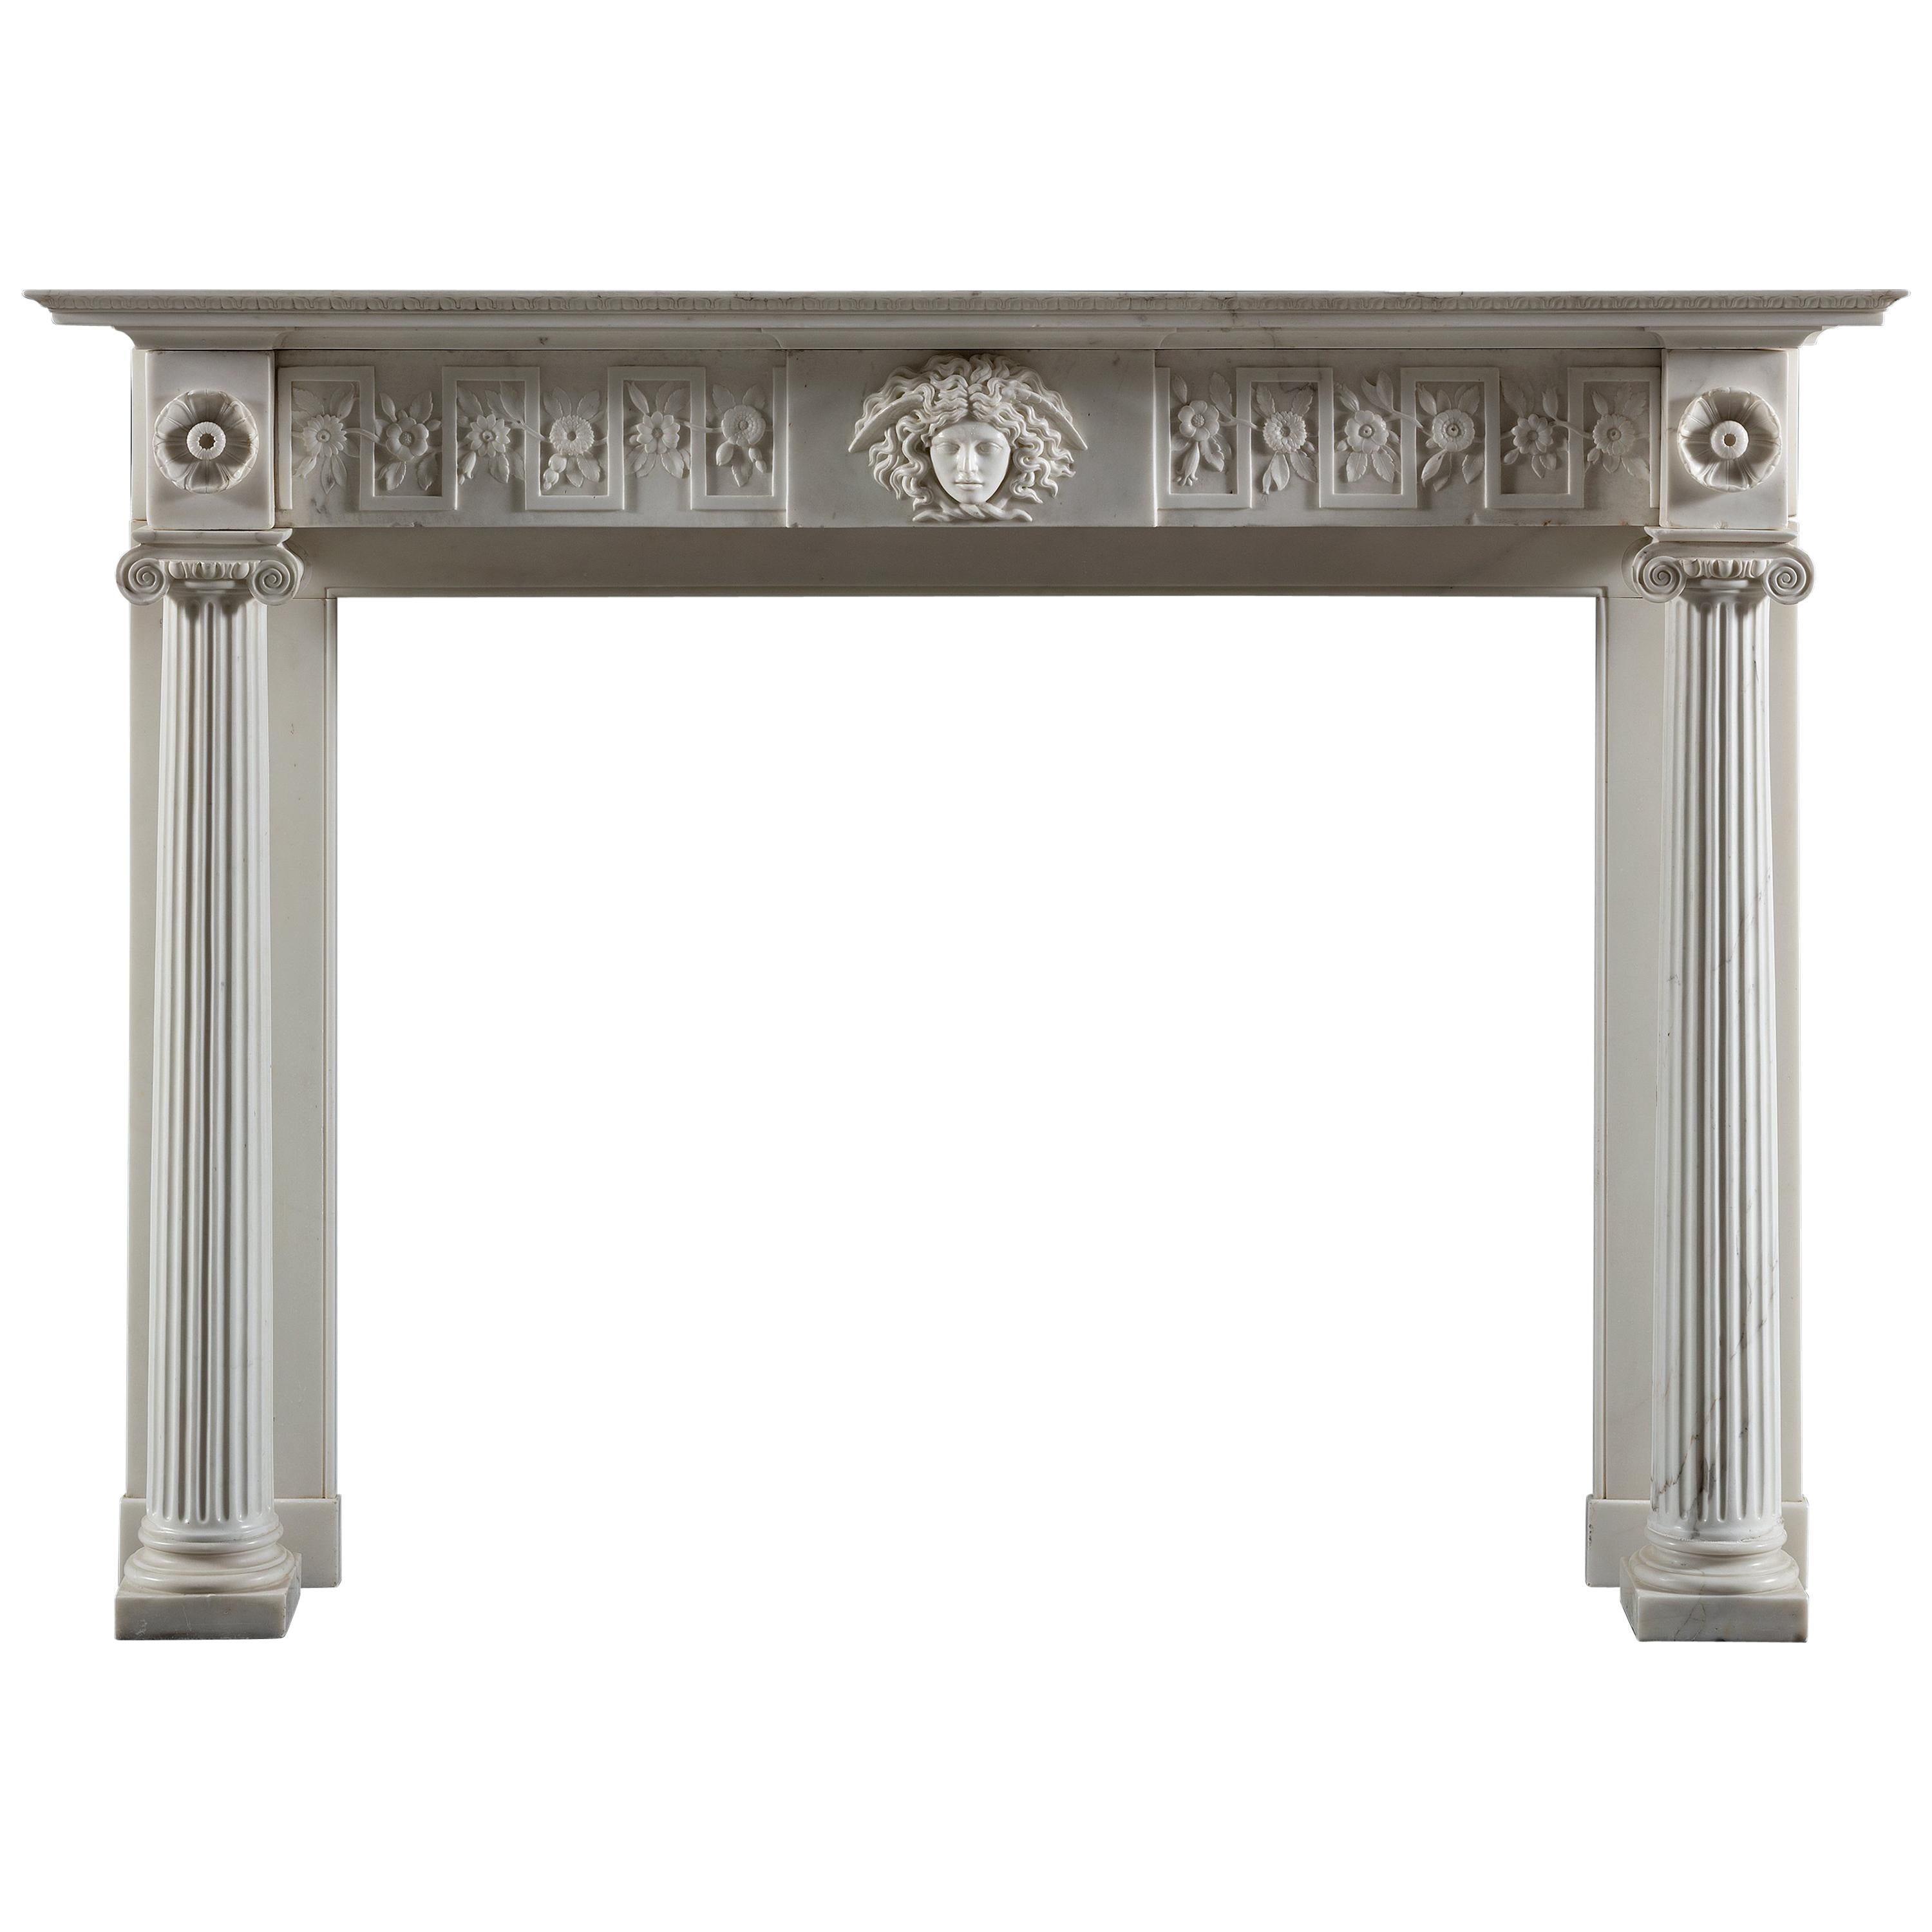 Regency Period, Neoclassical Column Fireplace in White Statuary Marble For Sale